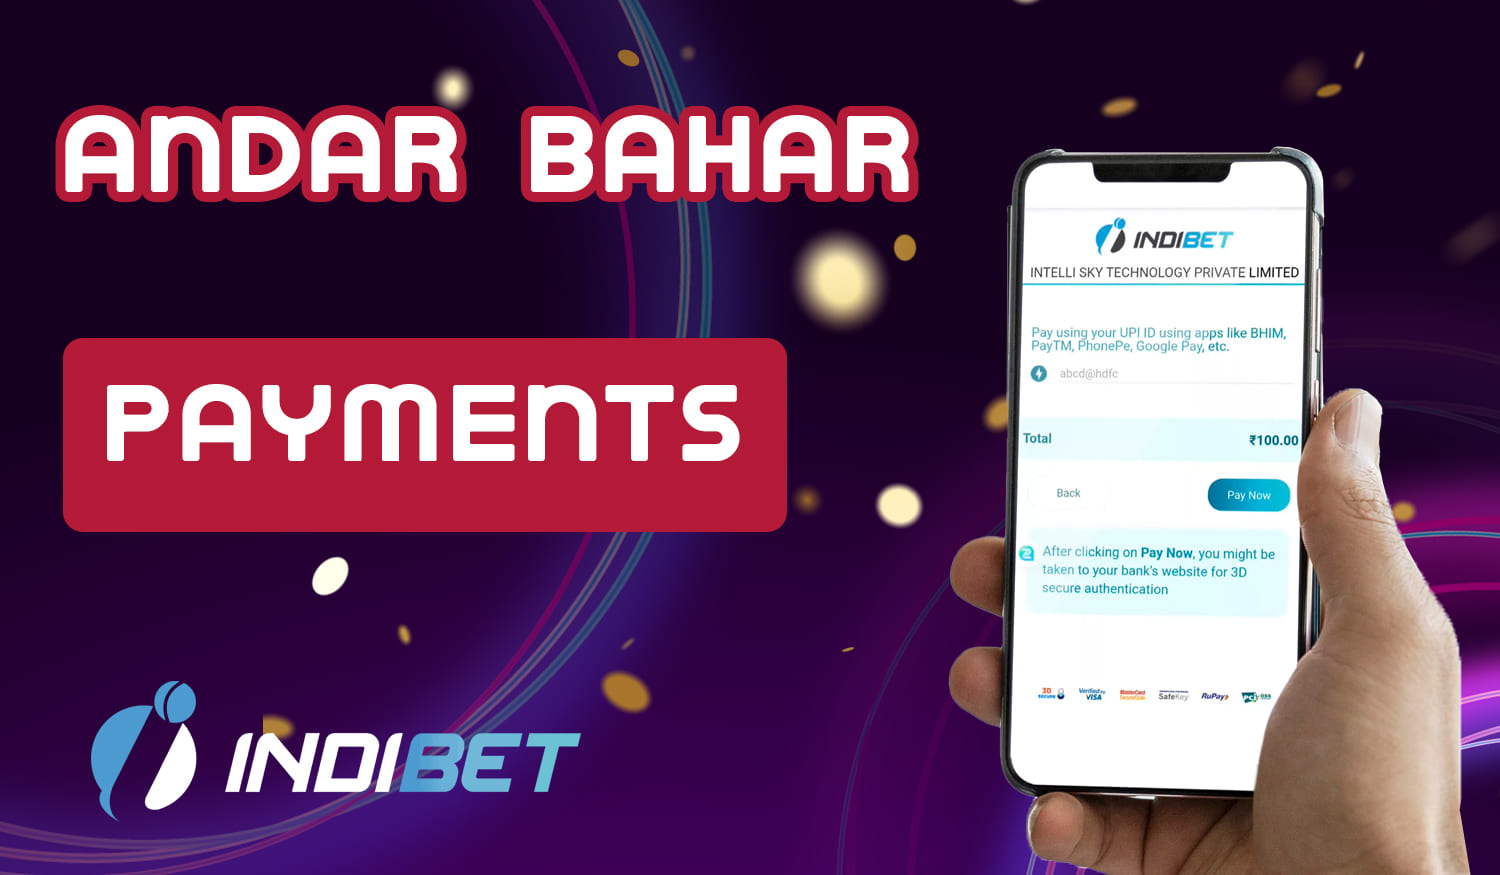 What payment methods can be used to make a deposit and withdraw funds at Indibet?